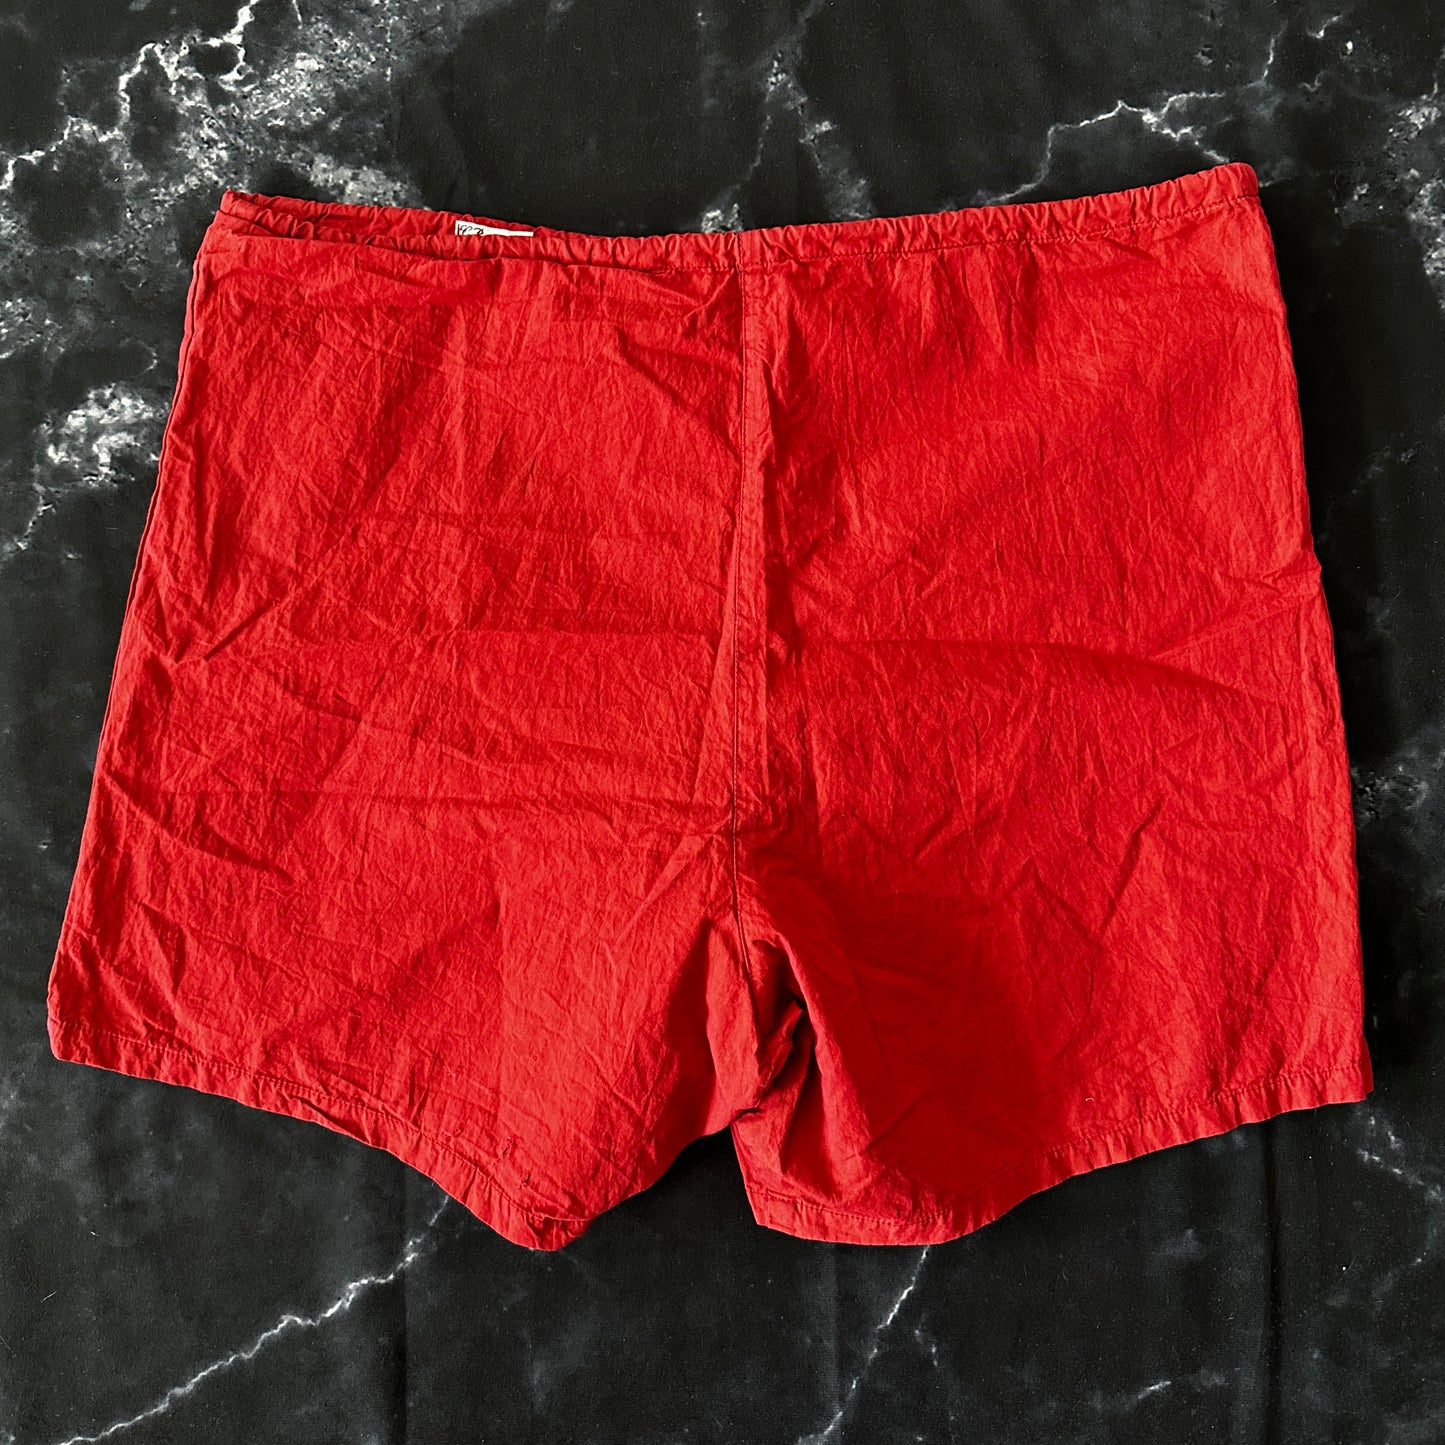 CP Company Vintage 80s Swim Shorts - 48 / M - Made in Italy